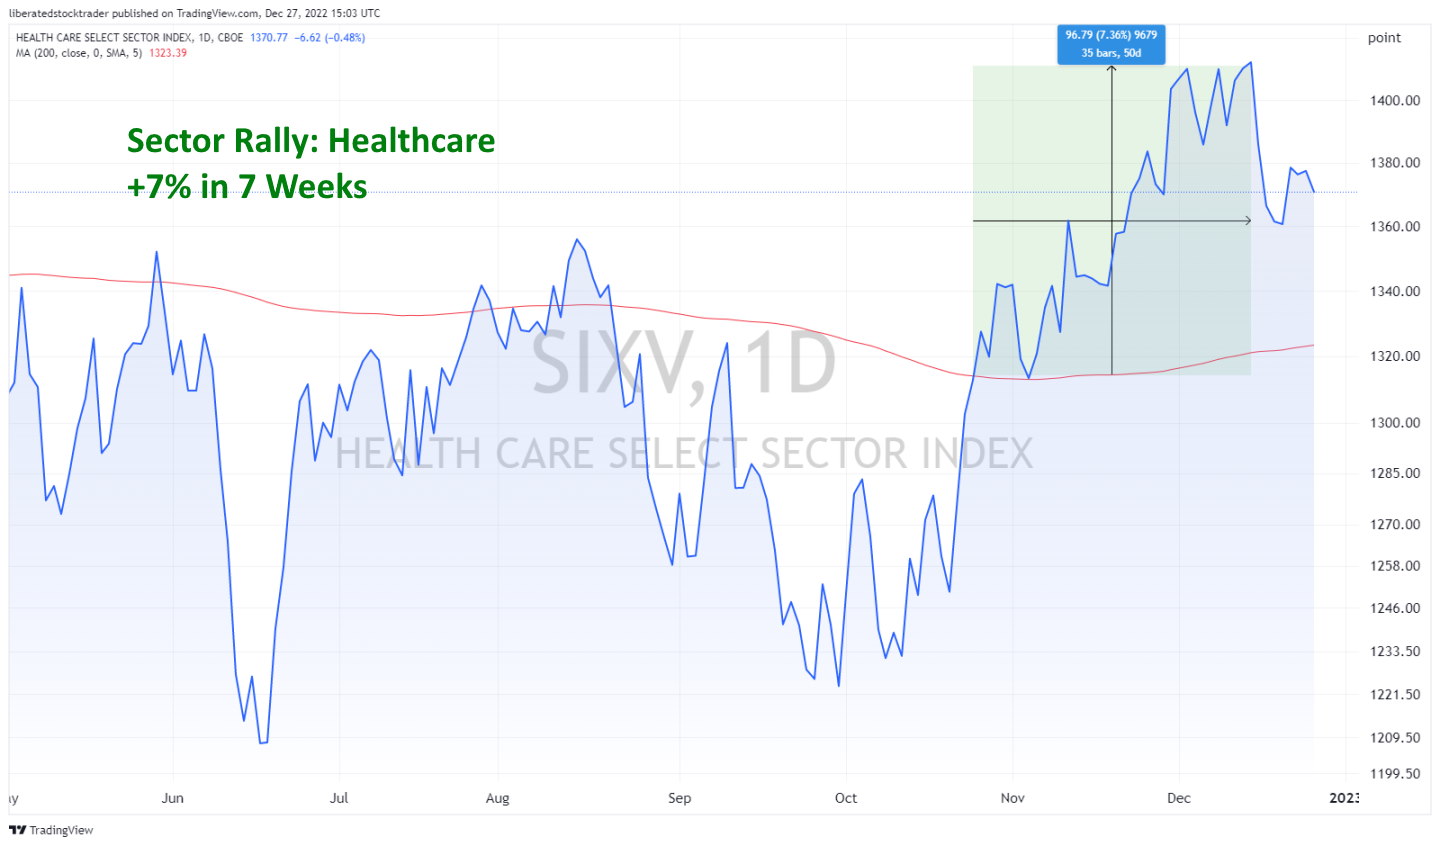 Sector Rally In the Healthcare Industry - Chart Example